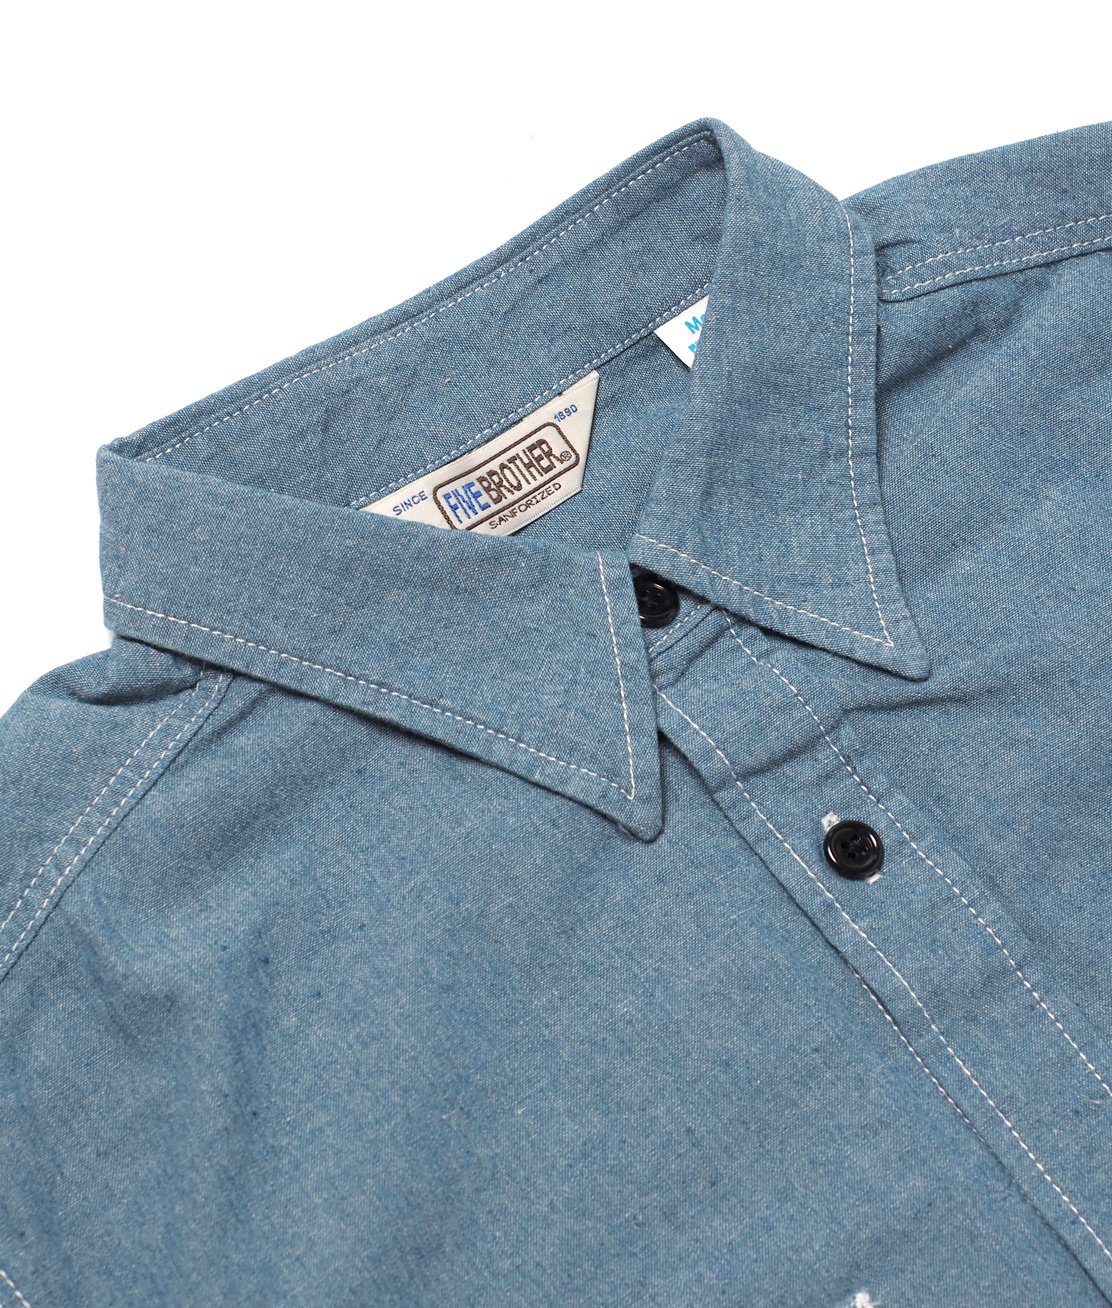 FIVE BROTHER】CHAMBRAY WORK SHIRT - BLUE シャンブレーワークシャツ